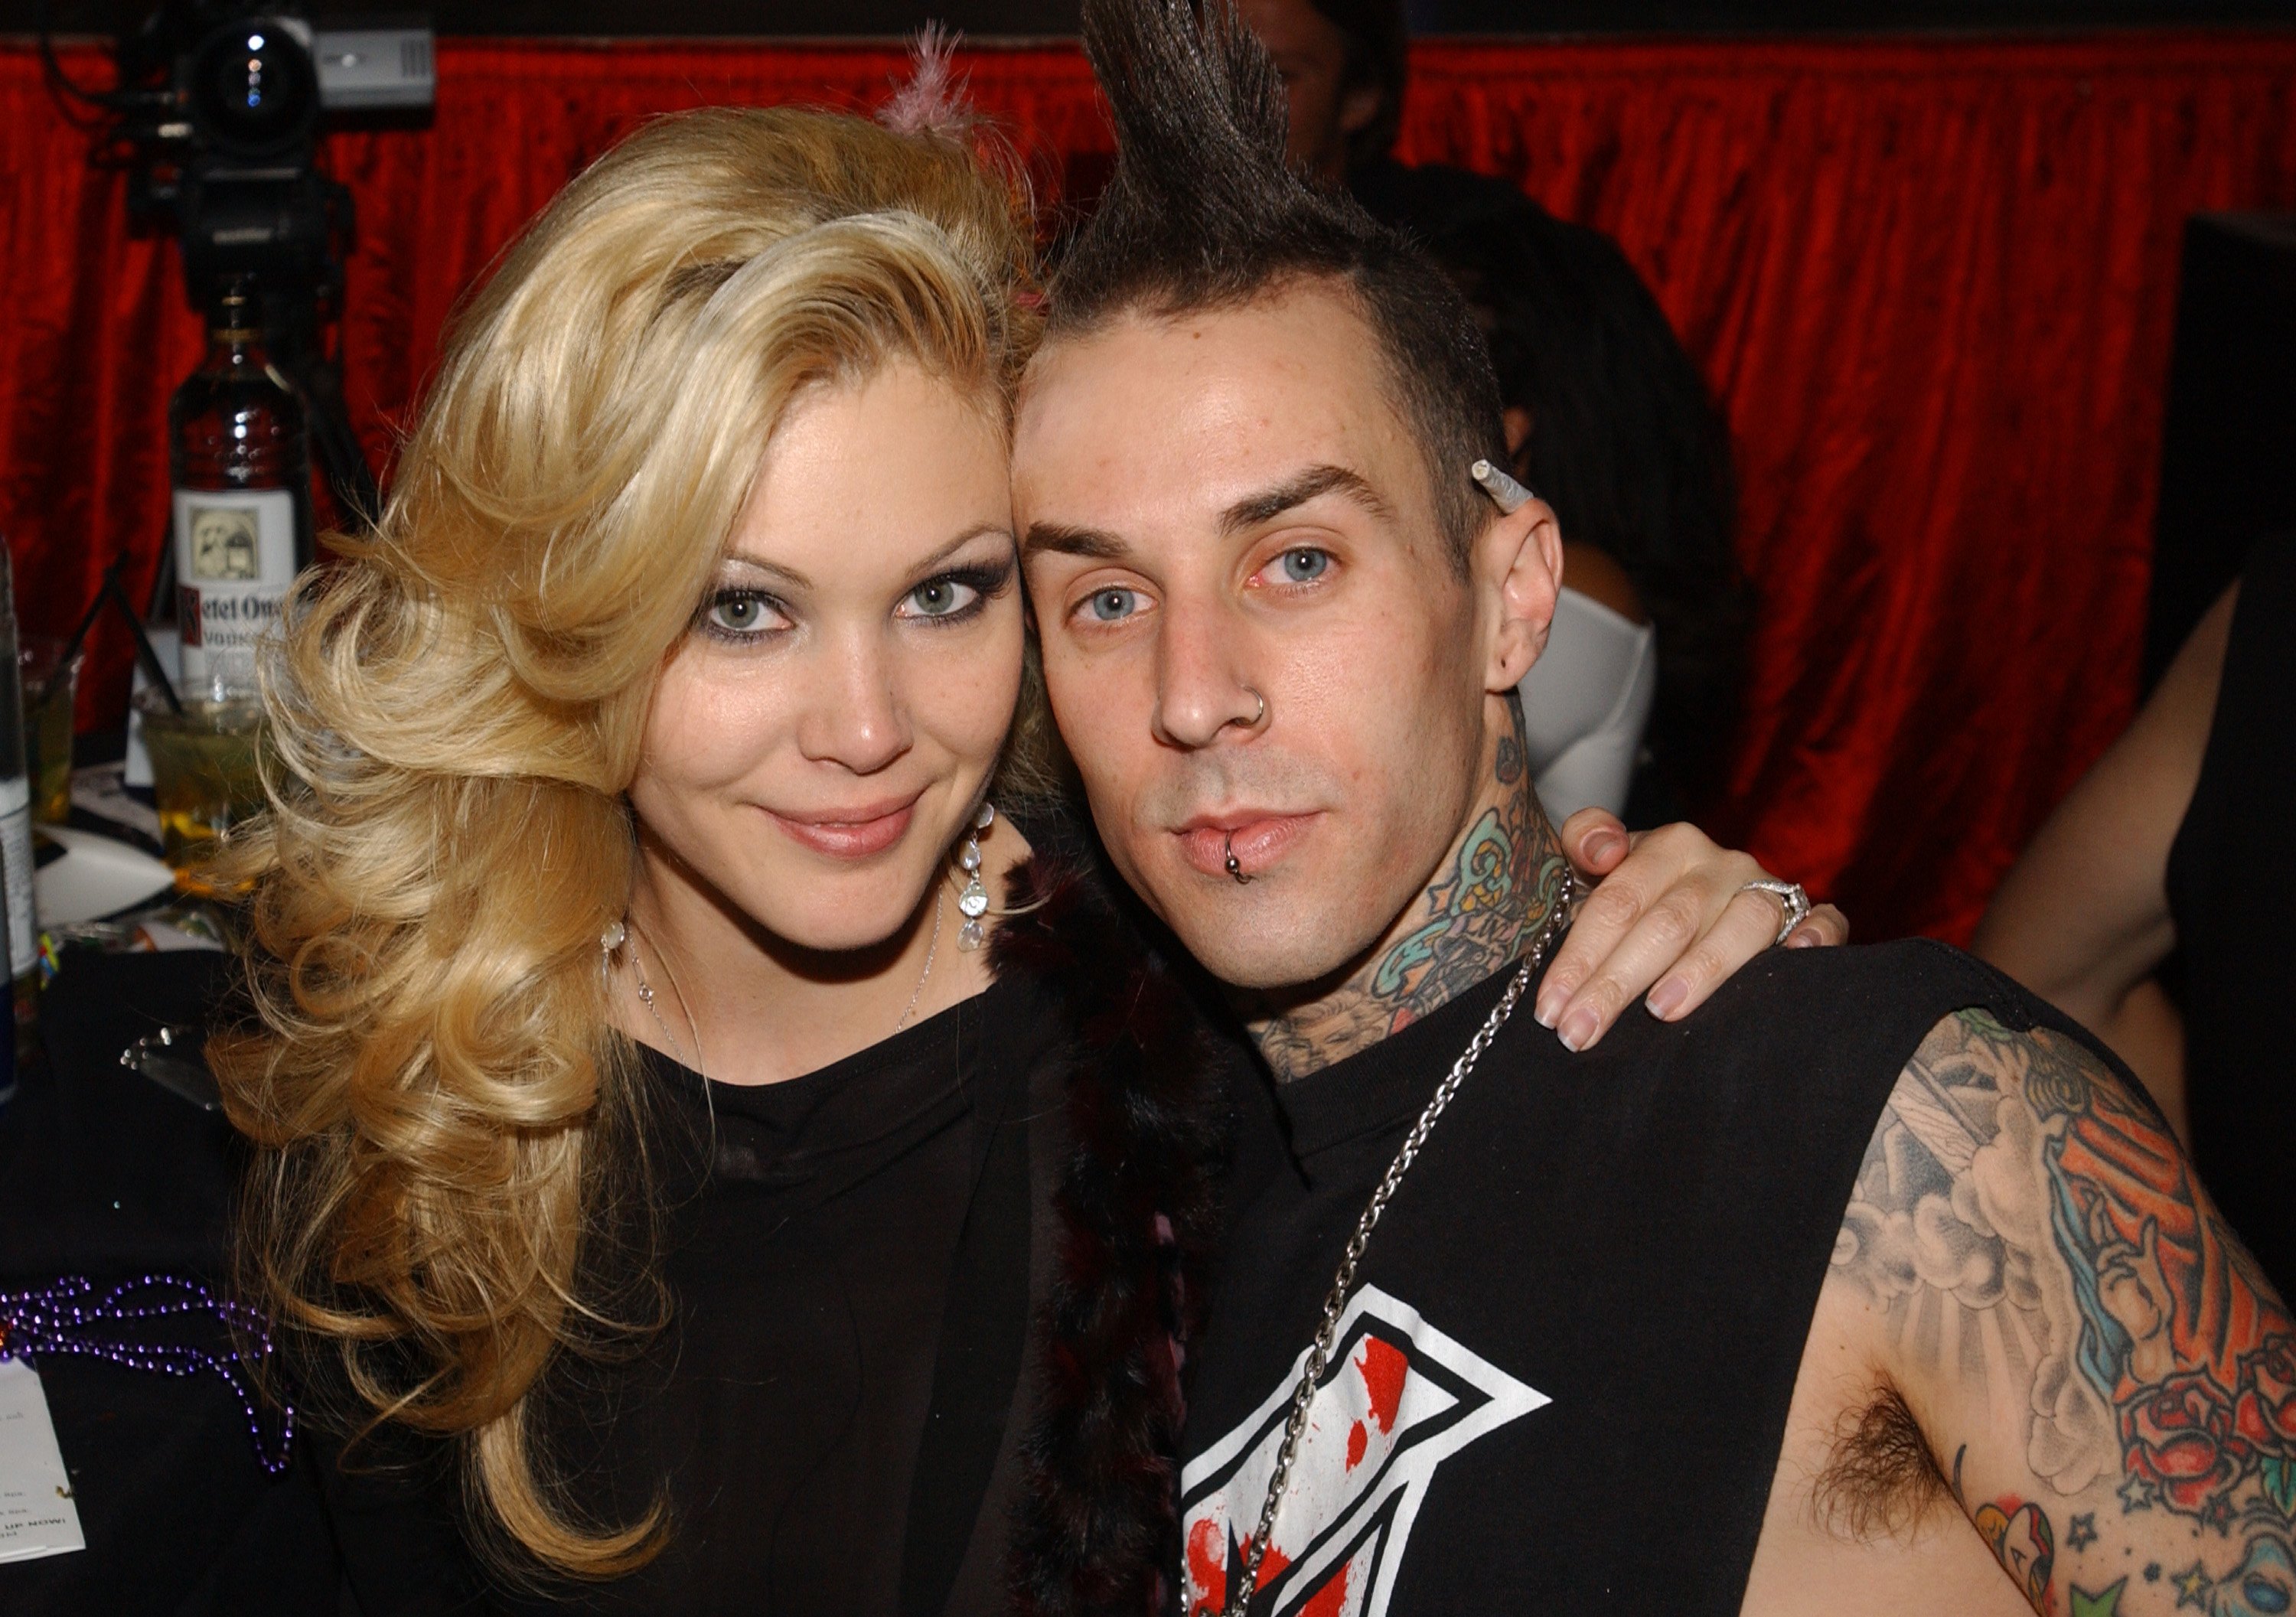 Shanna Moakler and Travis Barker pose for a photo together at Beachers Comedy Madhouse in 2004